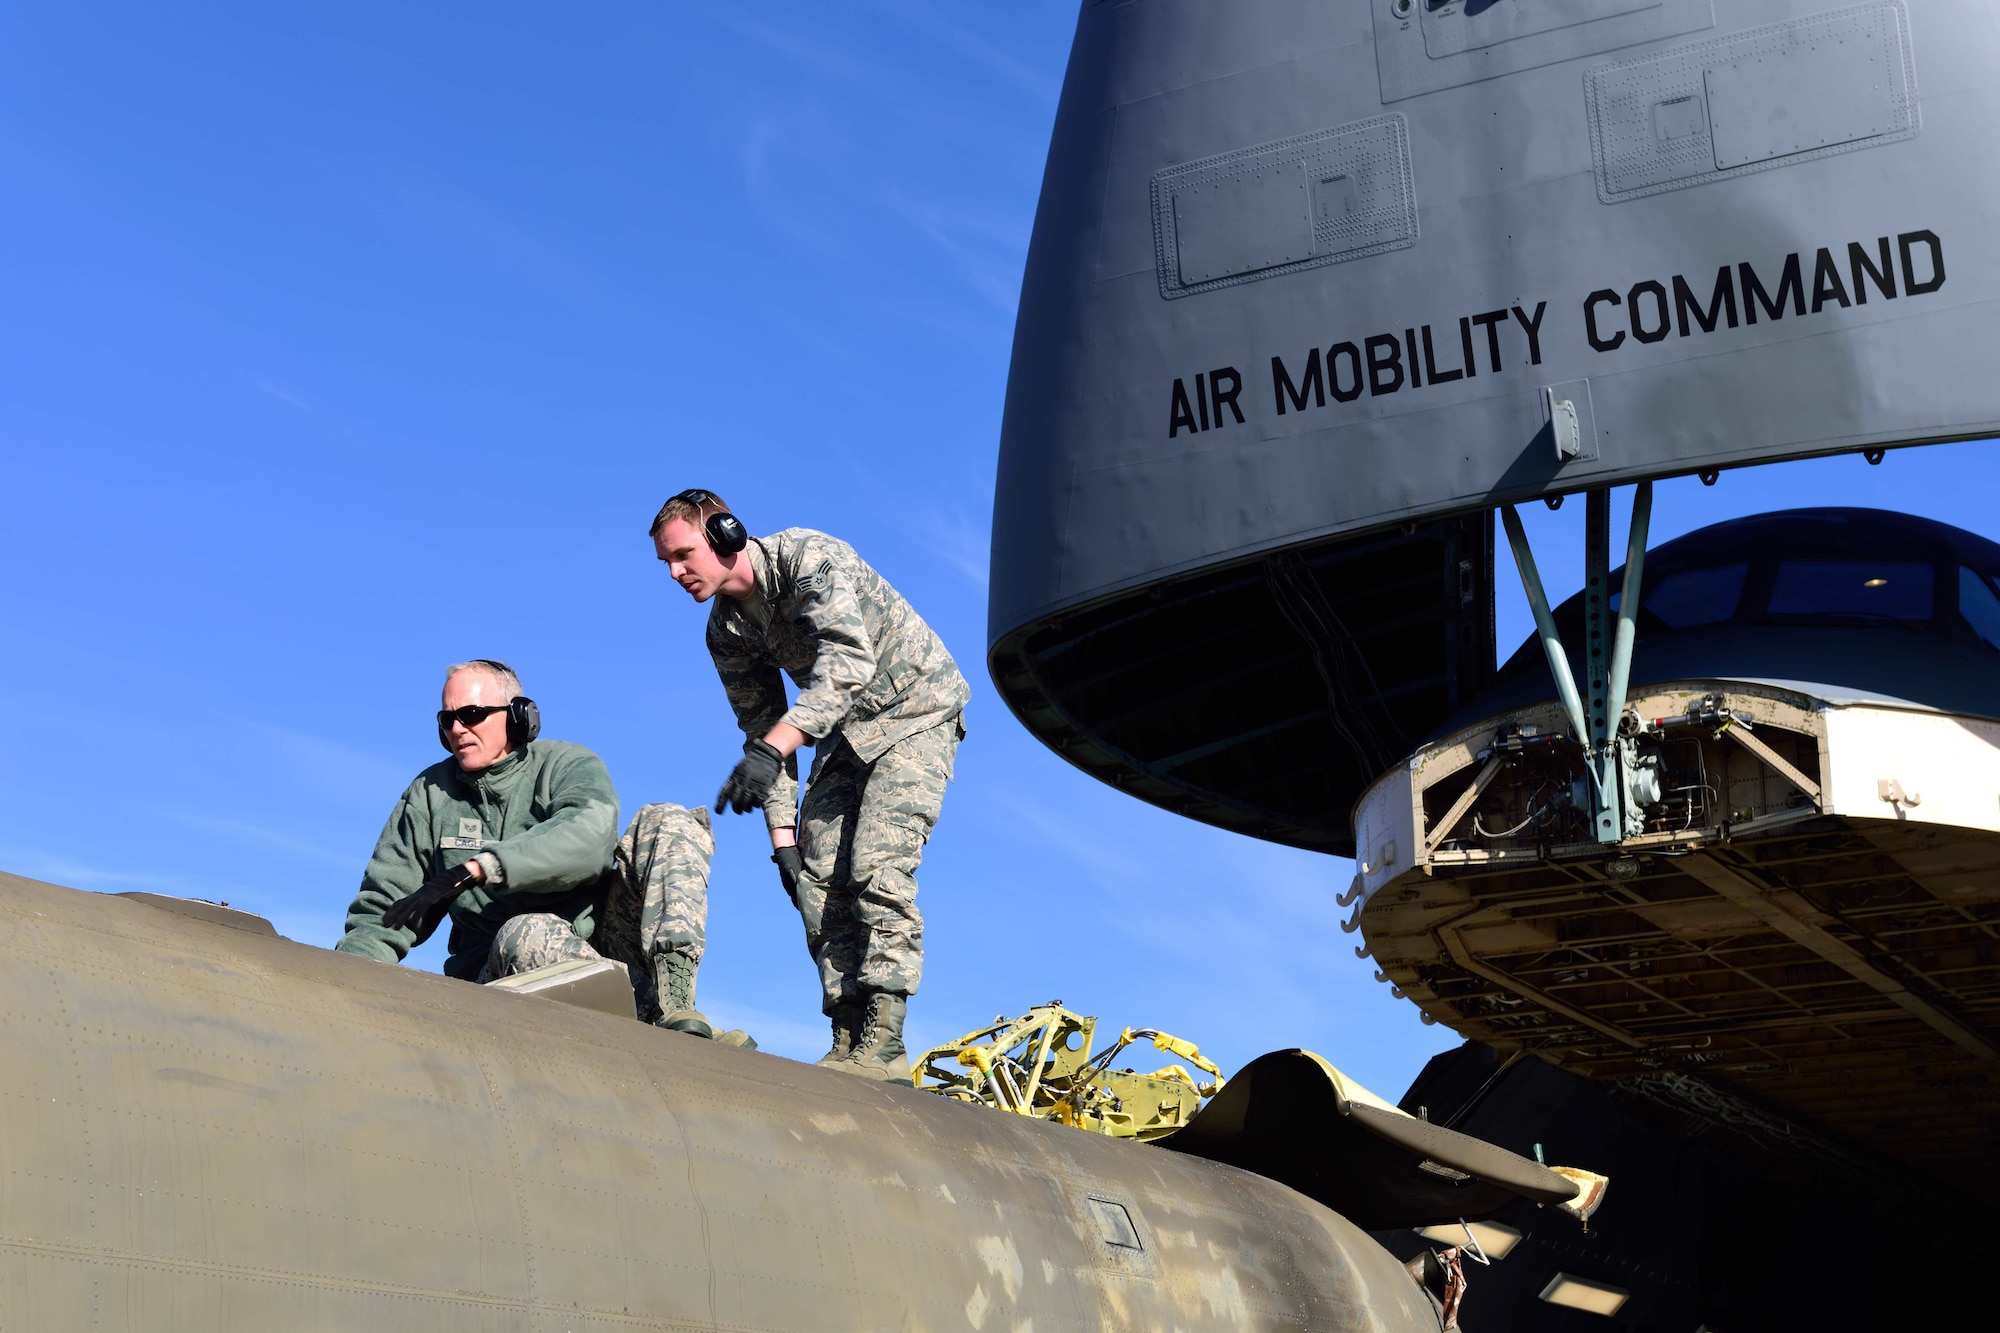 Staff Sgt. Jim Cagle and Senior Airman Preston Spear, 41st Aerial Port Squadron air transportation technicians out of Keesler Air Force Base, Miss., check the clearance of a CH-47 Chinook helicopter to make sure it will fit into cargo bay of the C-5M Super Galaxy aircraft at the Gulfport Combat Readiness Training Center – Battlefield Airman Center, Miss., Jan. 6, 2018.  Reservists, guardsmen, civilians and active-duty members from the Air Force, Army and Navy worked side by side during this training event called Breaking Barriers GRIP III Jan. 5-7, highlighting the joint effort of this training opportunity. (U.S. Air Force photo by Tech. Sgt. Ryan Labadens)